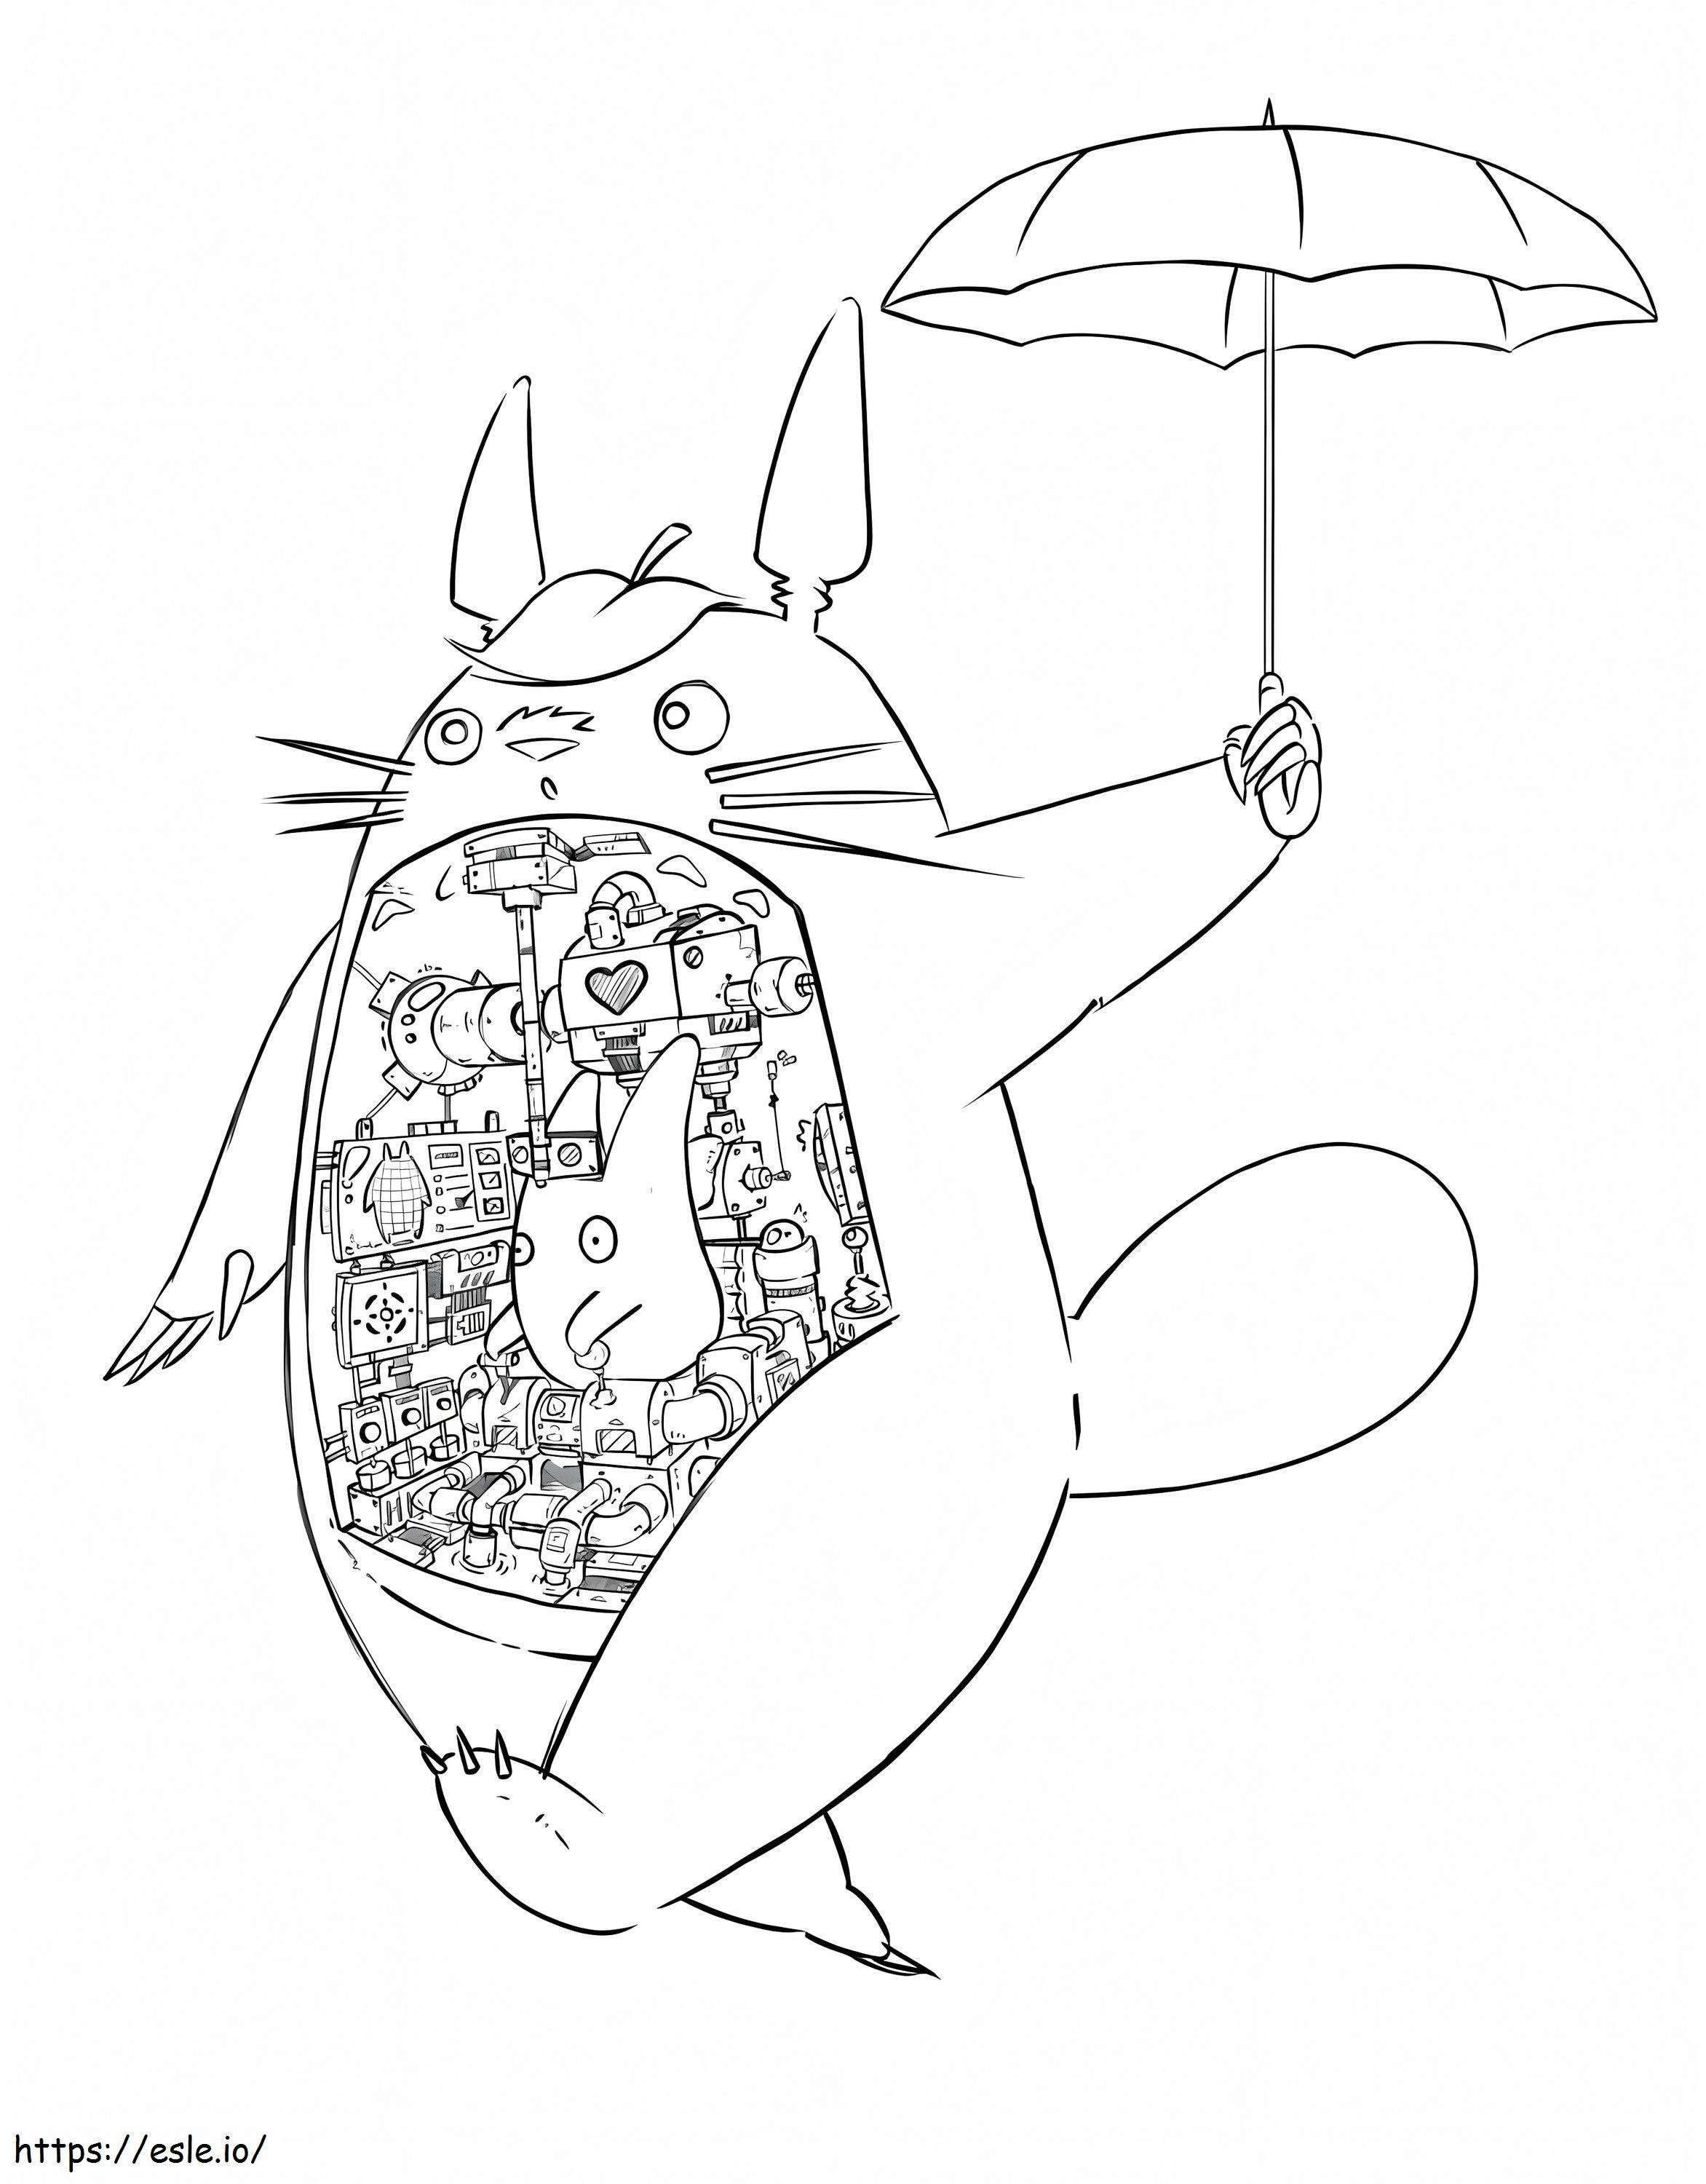 Totoro Machine coloring page